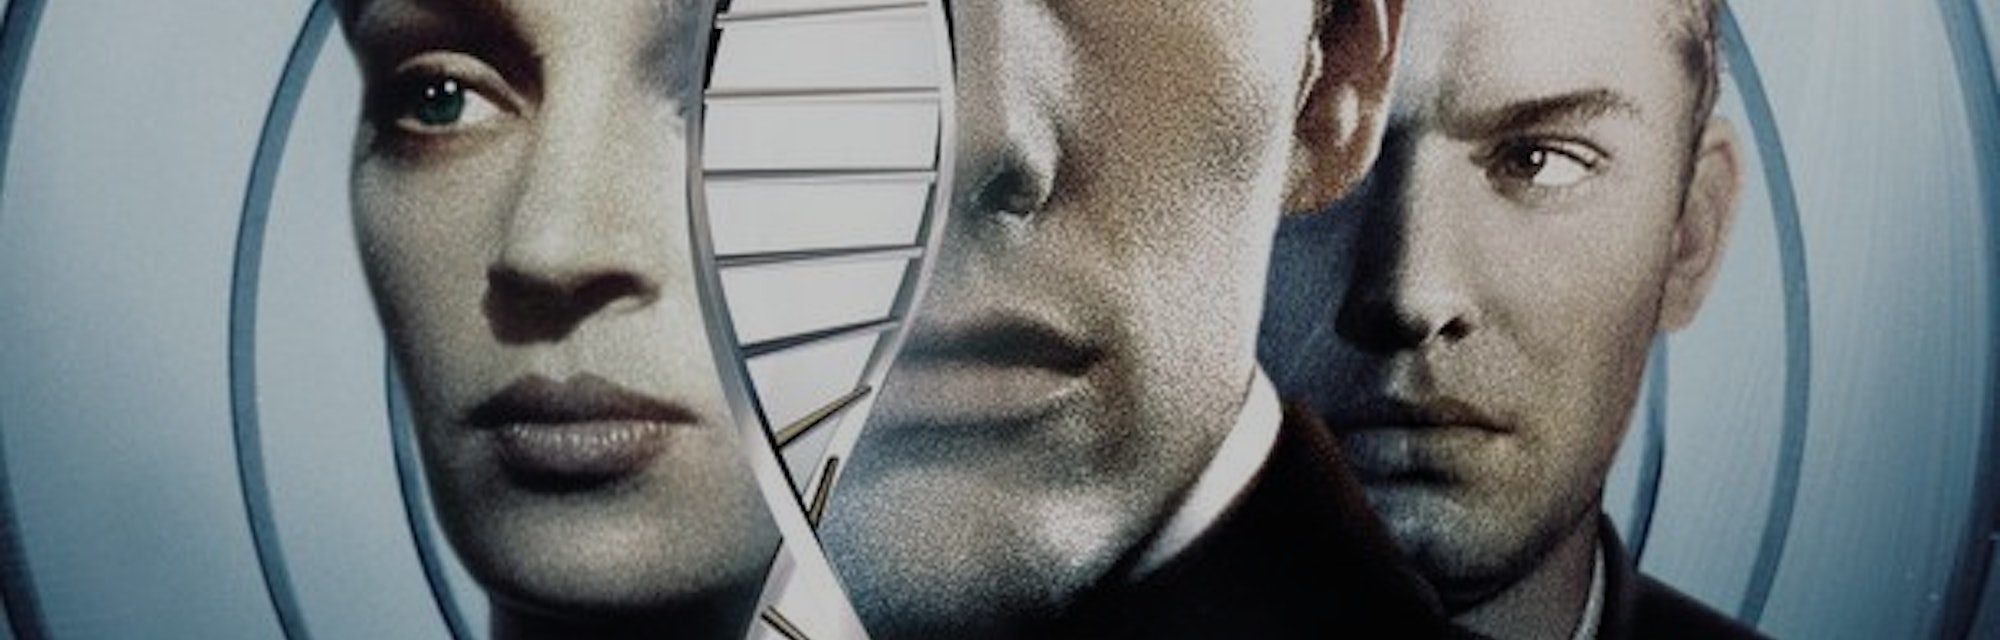 Re Watching Gattaca At The Dawn Of The Age Of Crispr And Genetic Editing